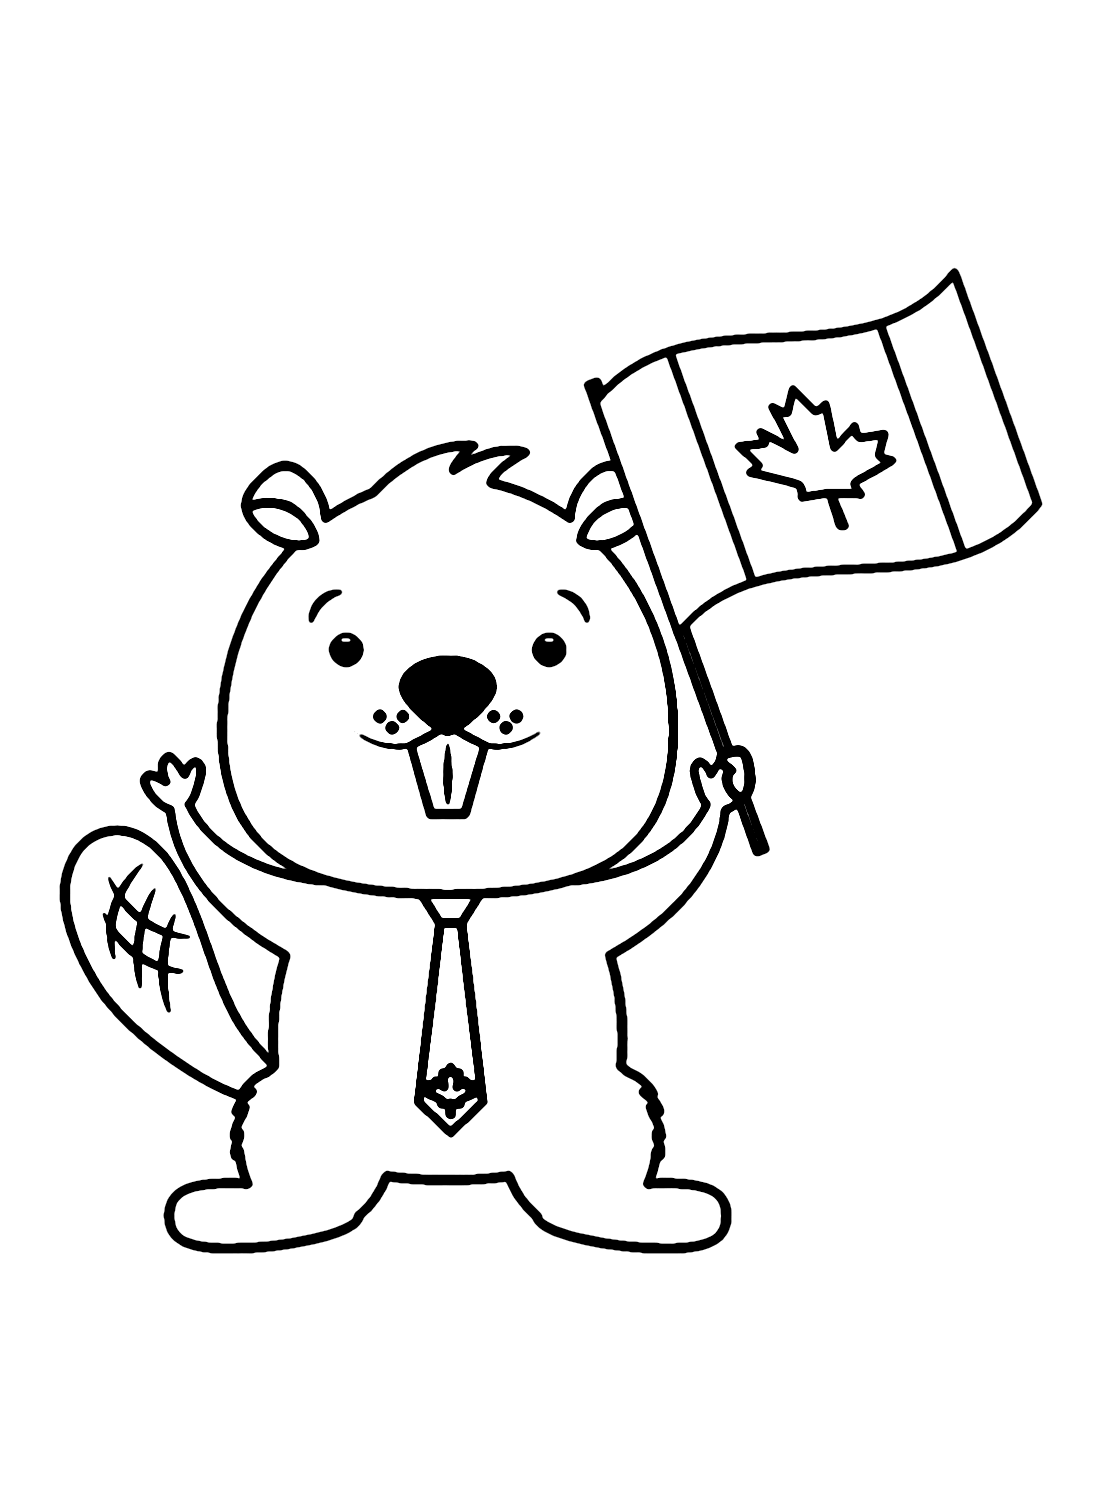 Happy Canada Day Coloring Page